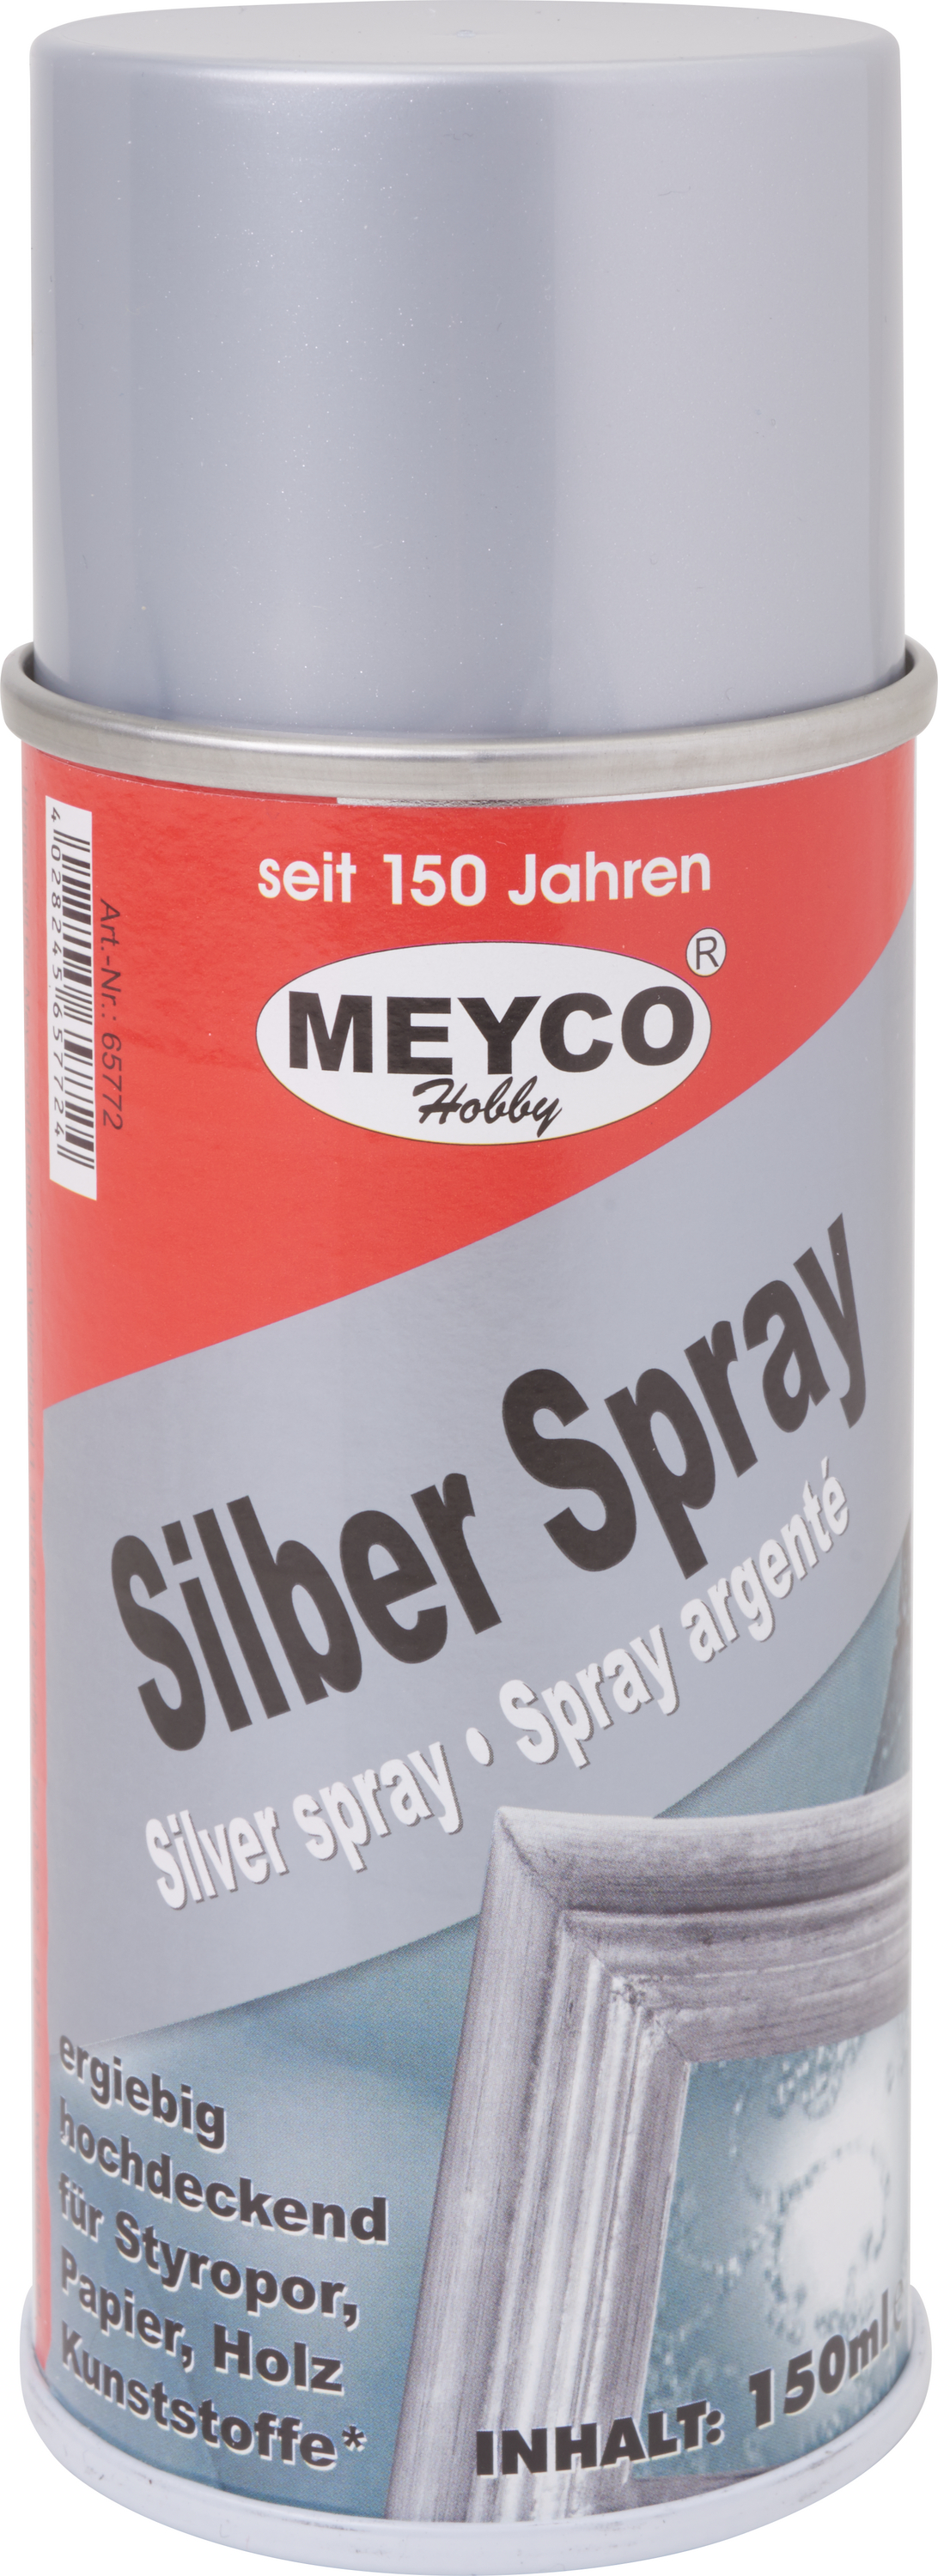 SPRAY PAILLETTES ARGENT (Ininflammable - 150 ml)